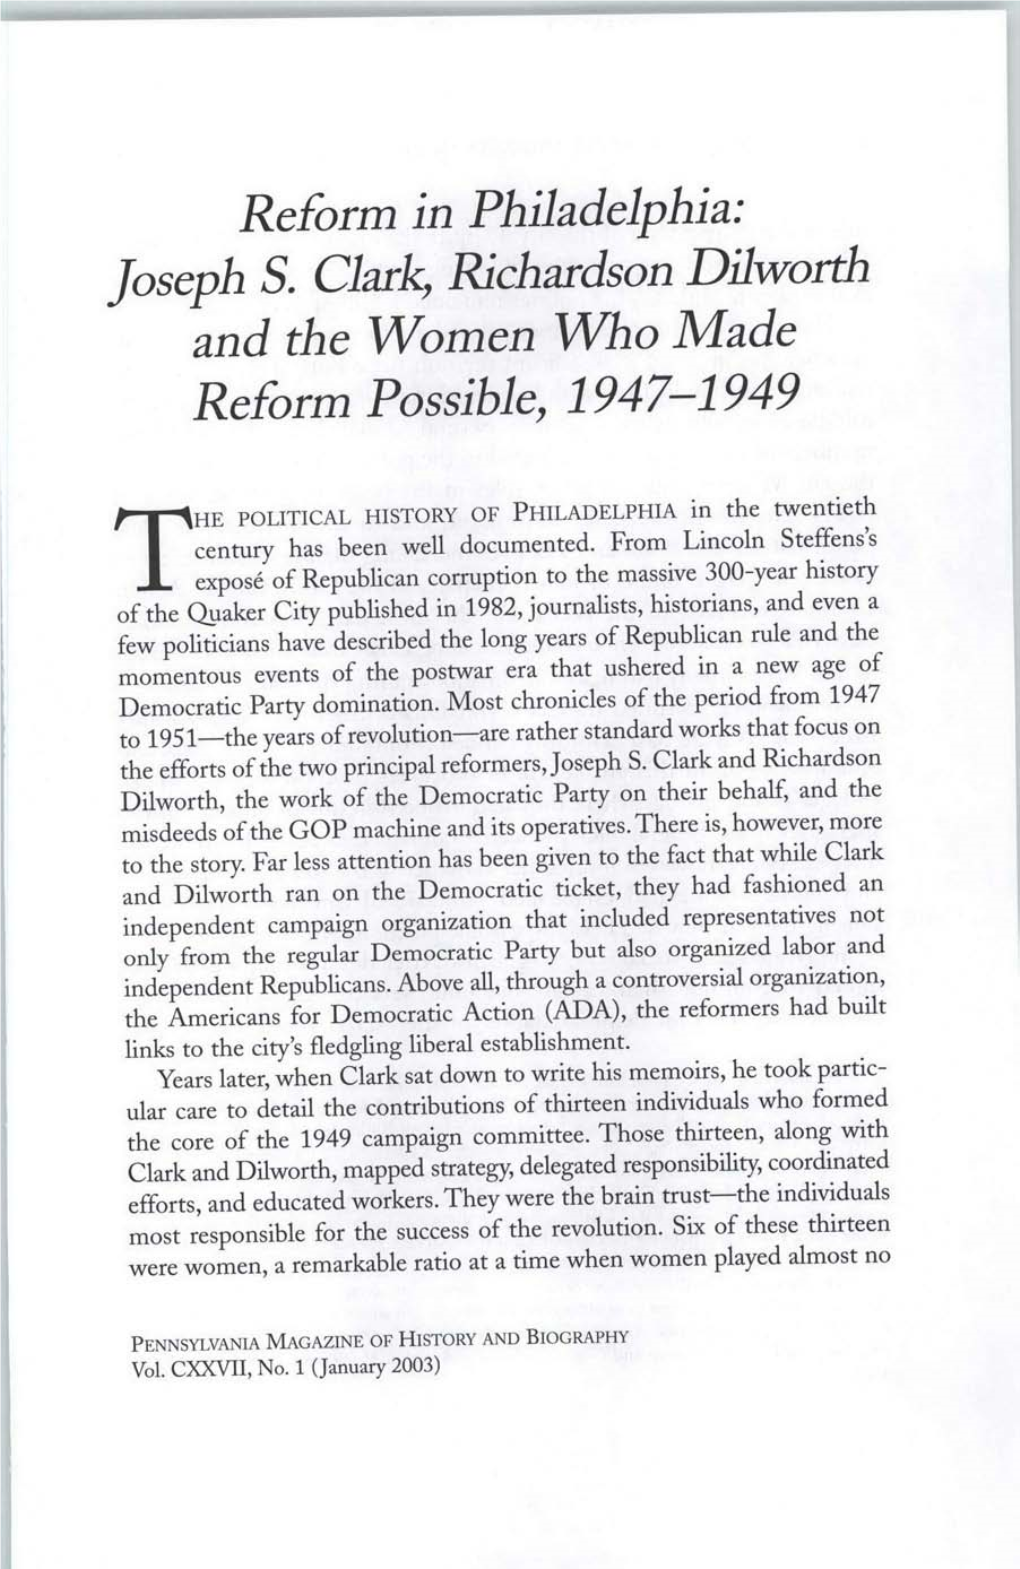 Reform in Philadelphia: Joseph S. Clark, Richardson Dilworth and the Women Who Made Reform Possible, 1947-1949